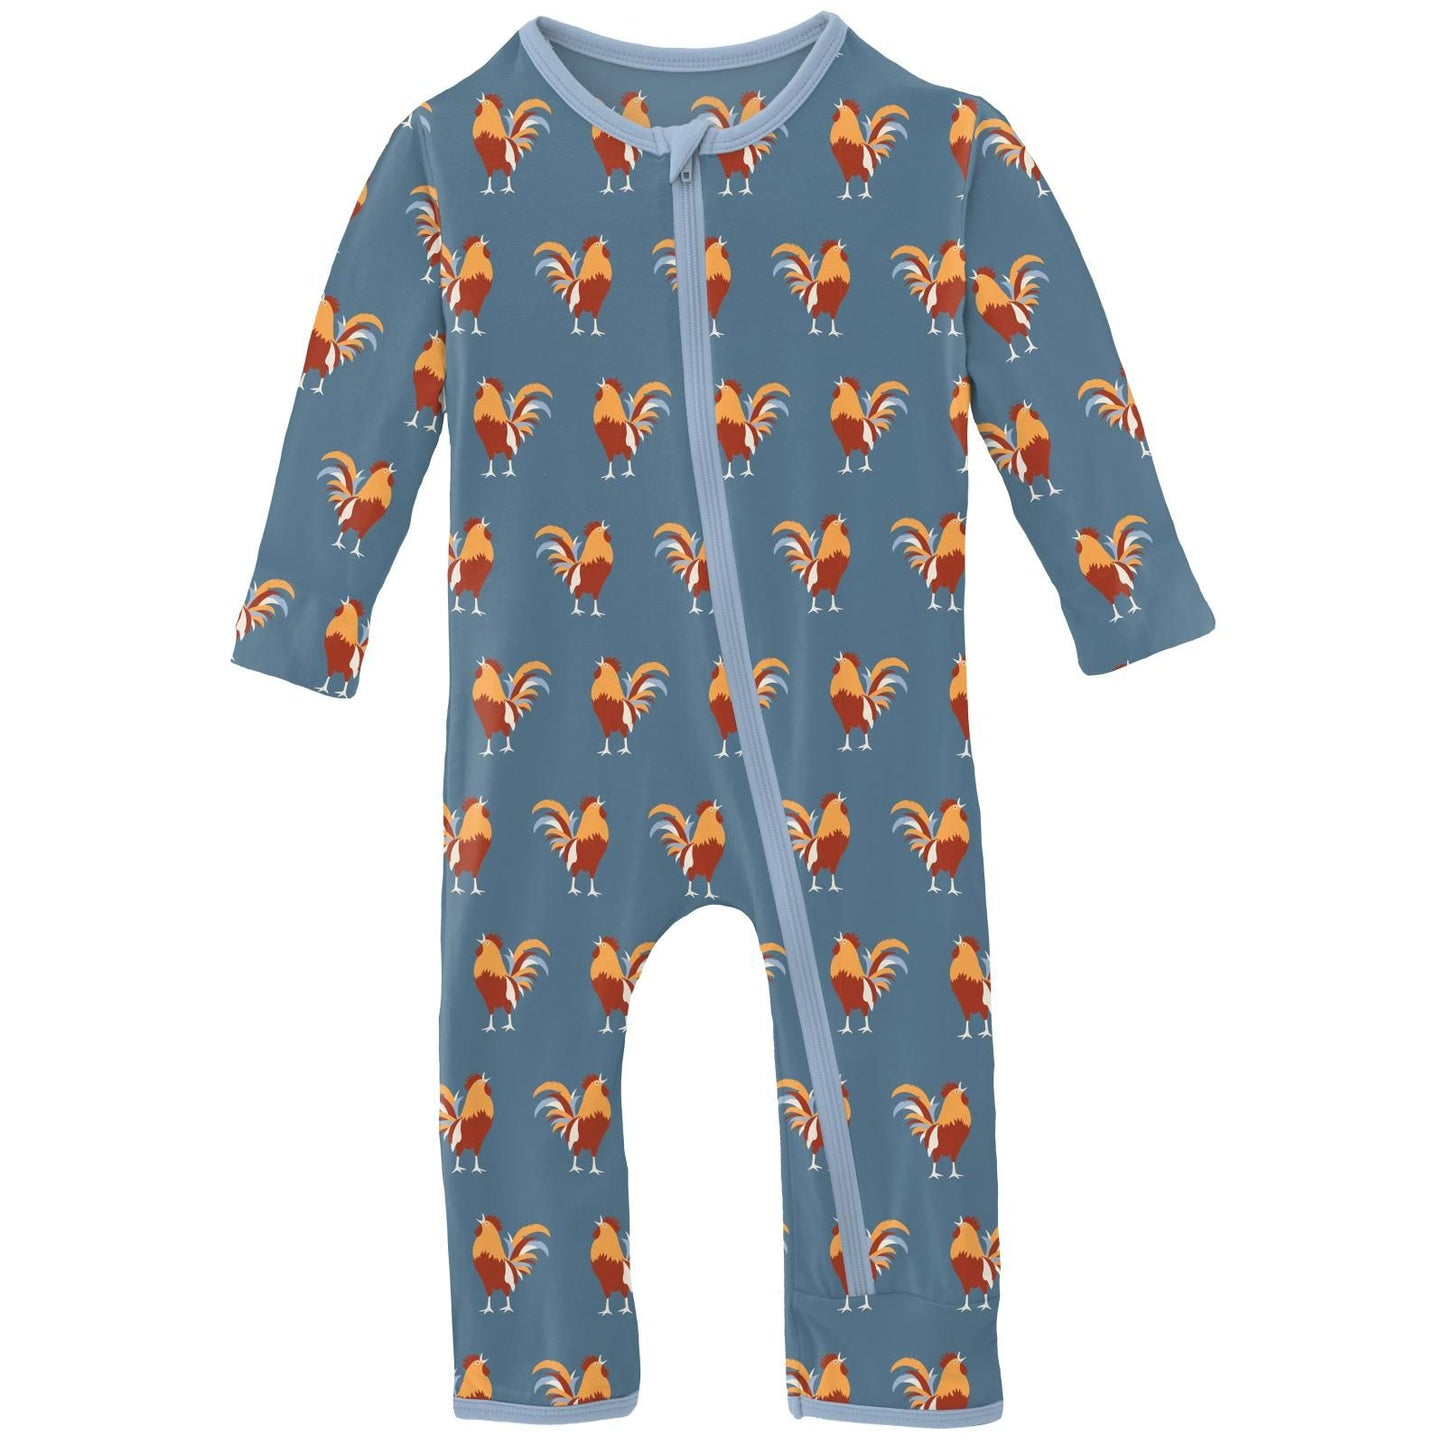 Last One - Size 14Y: Coverall (Snaps/Zipper) - Parisian Rooster